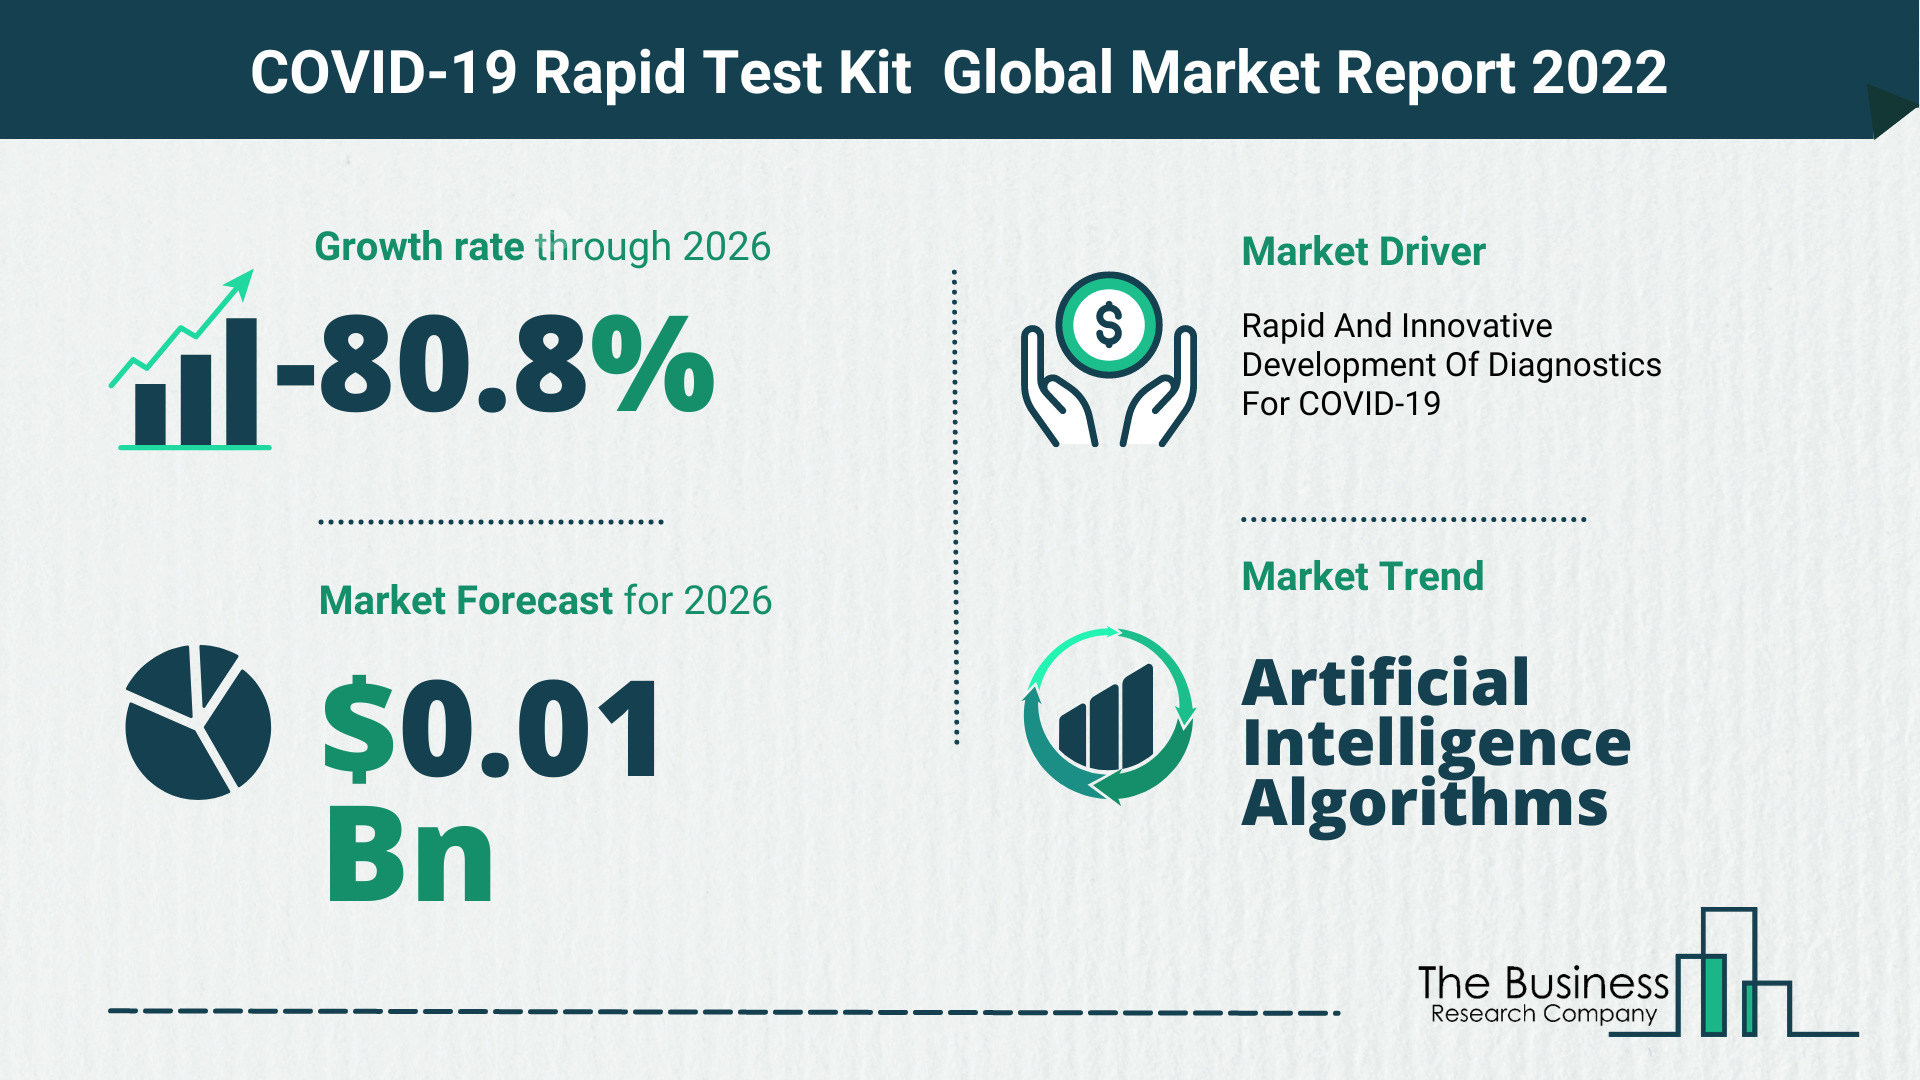 What Is The COVID-19 Rapid Test Kit Market Overview In 2022?